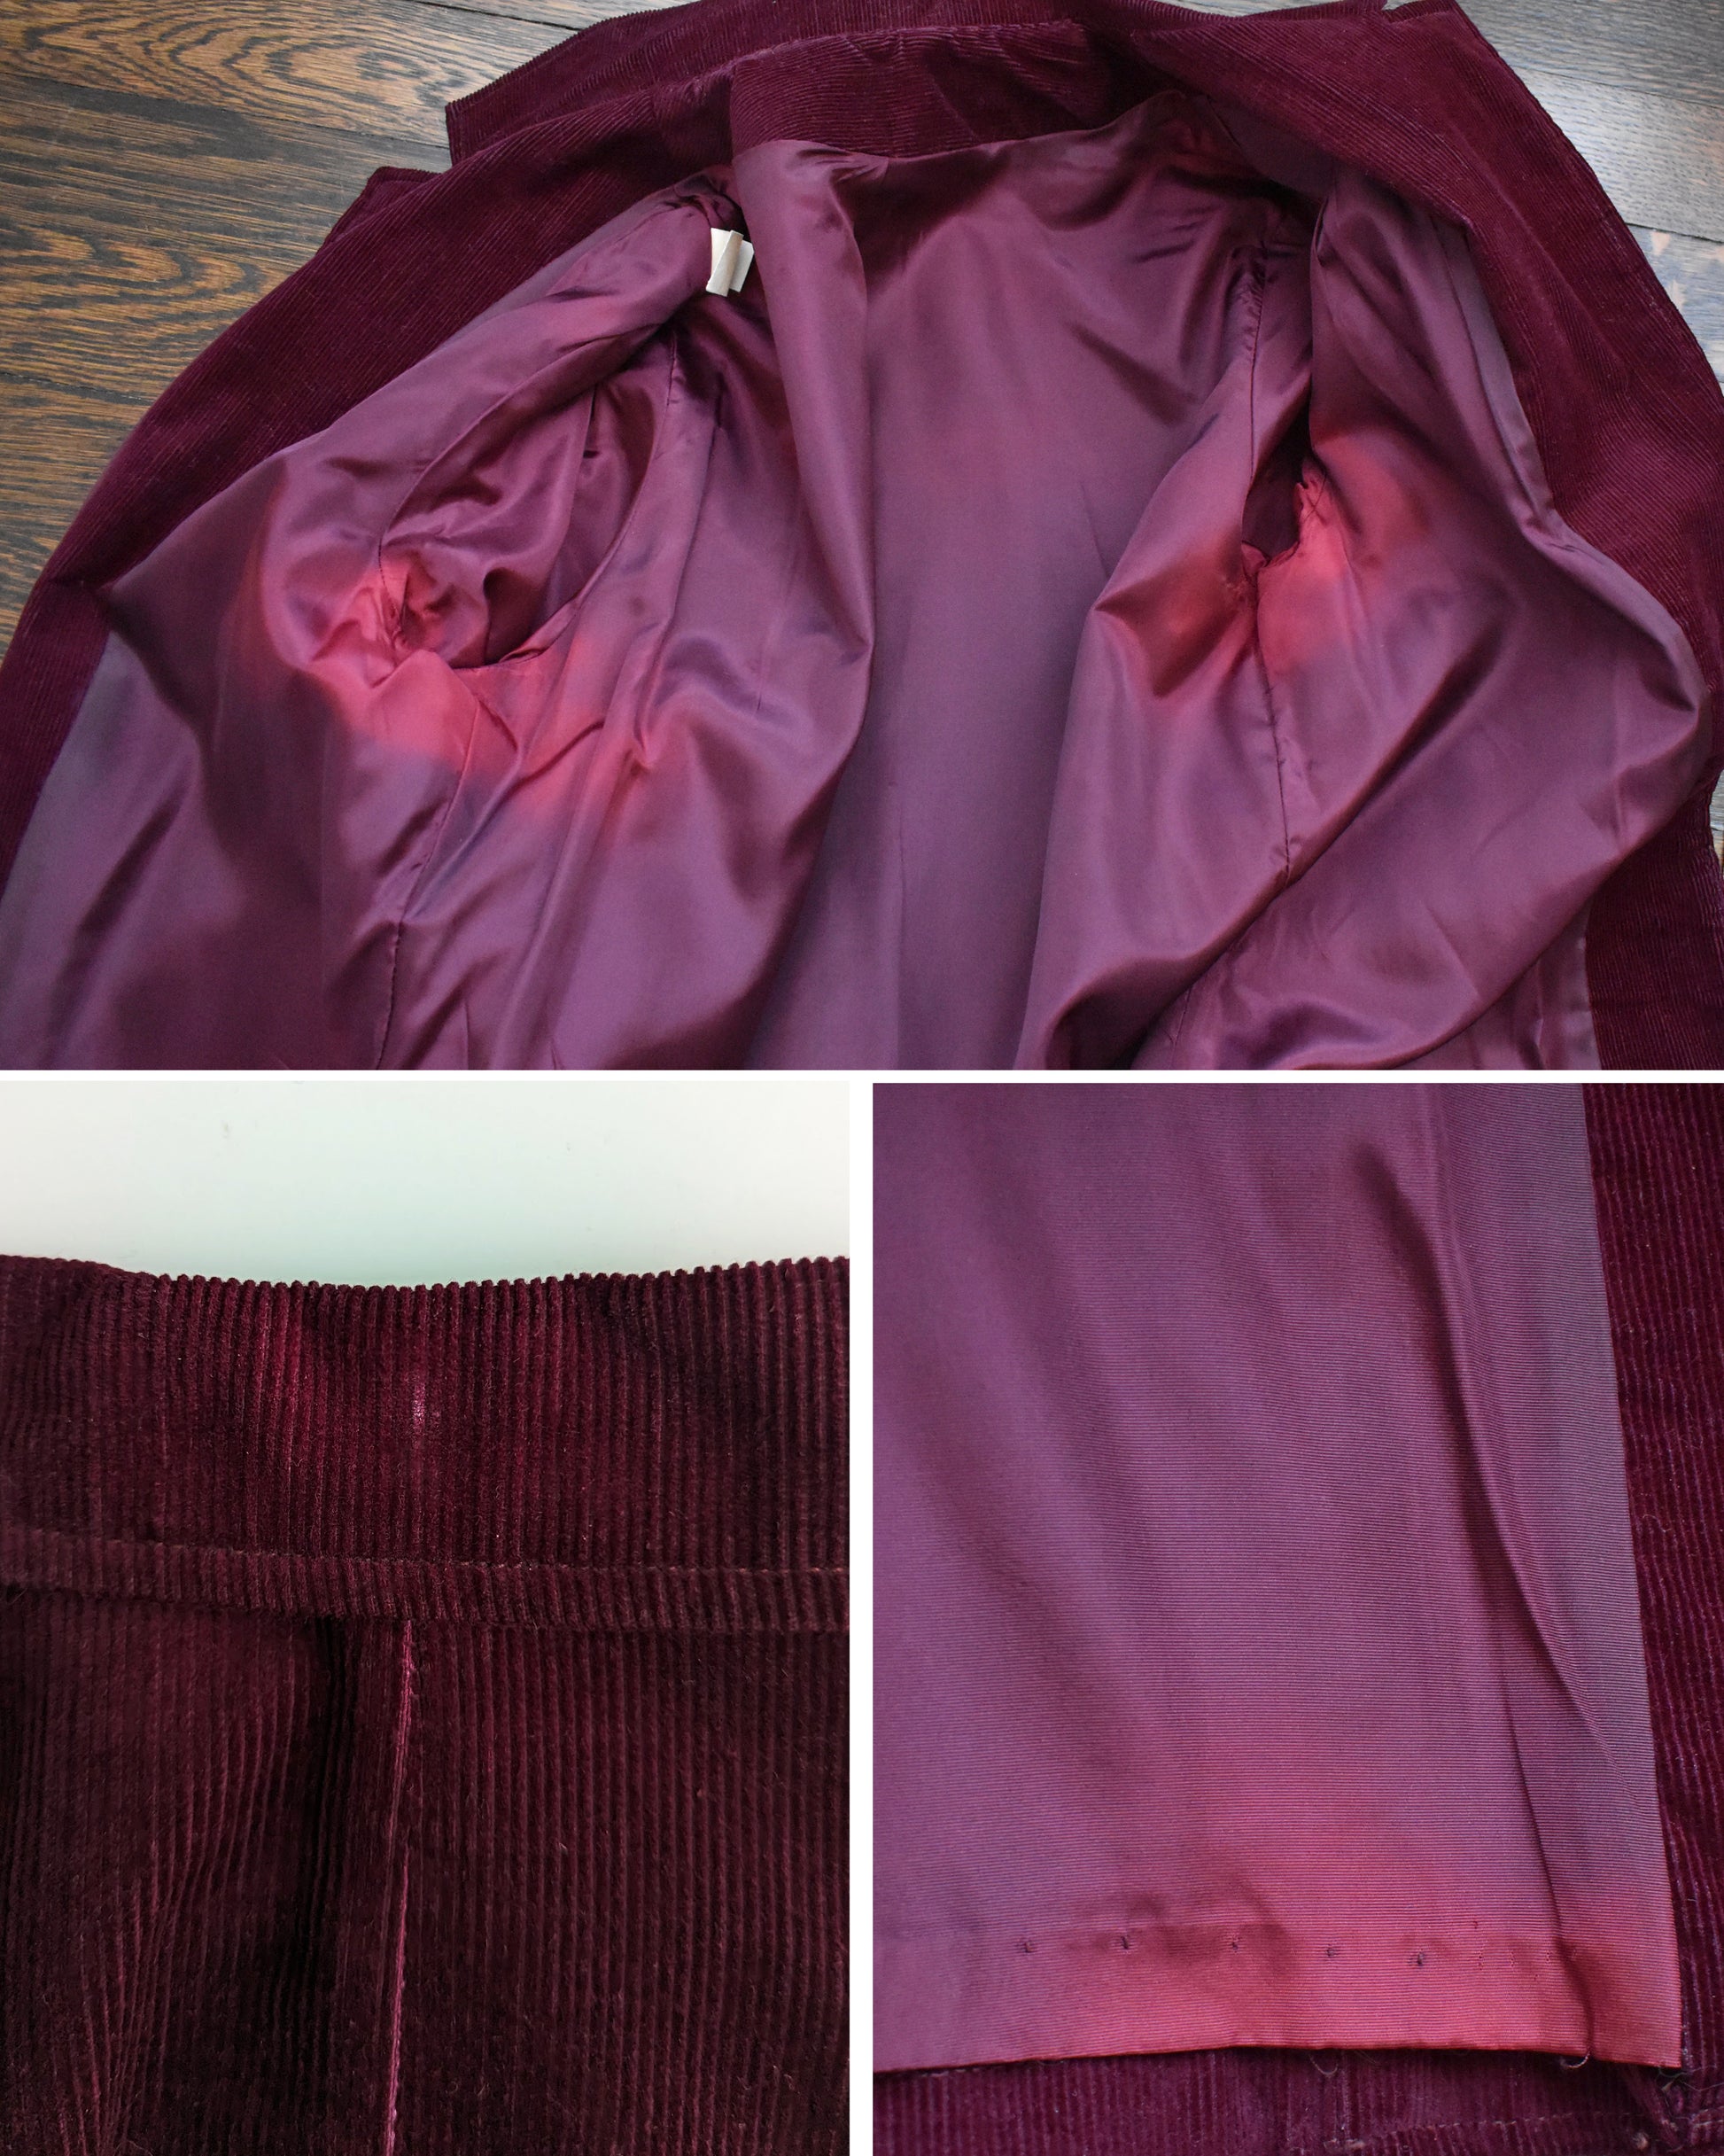 A collage of small flaws which include some discoloration to the lining, and a worn spot on the back of the collar.